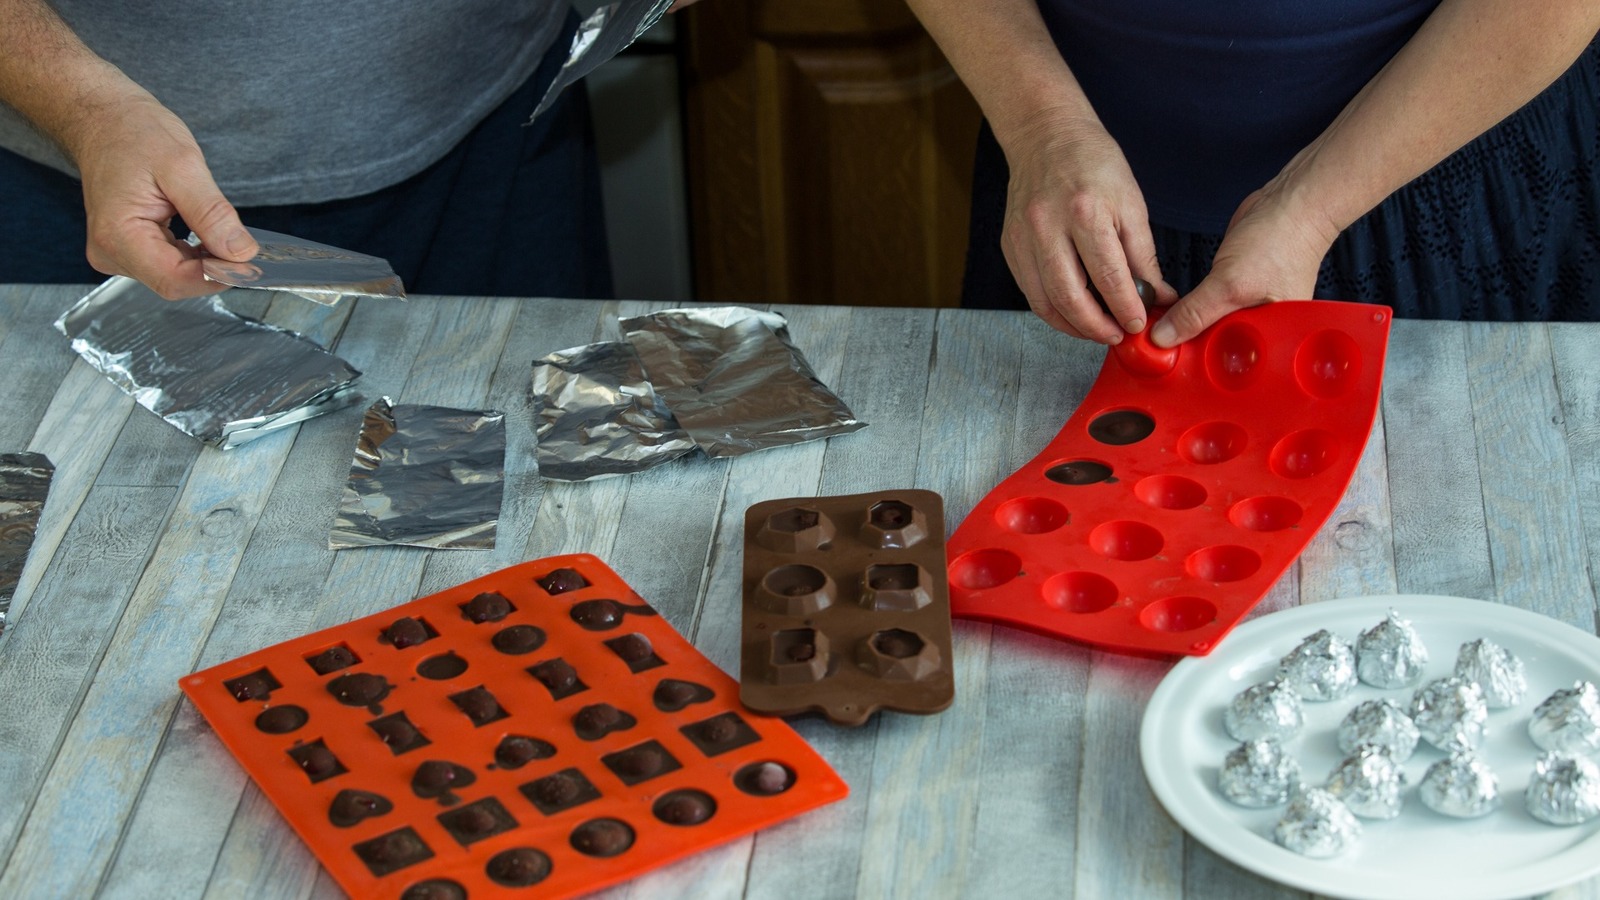 Make Chocolate Bonbons With Rubber Silicone Molds, Not Plastic